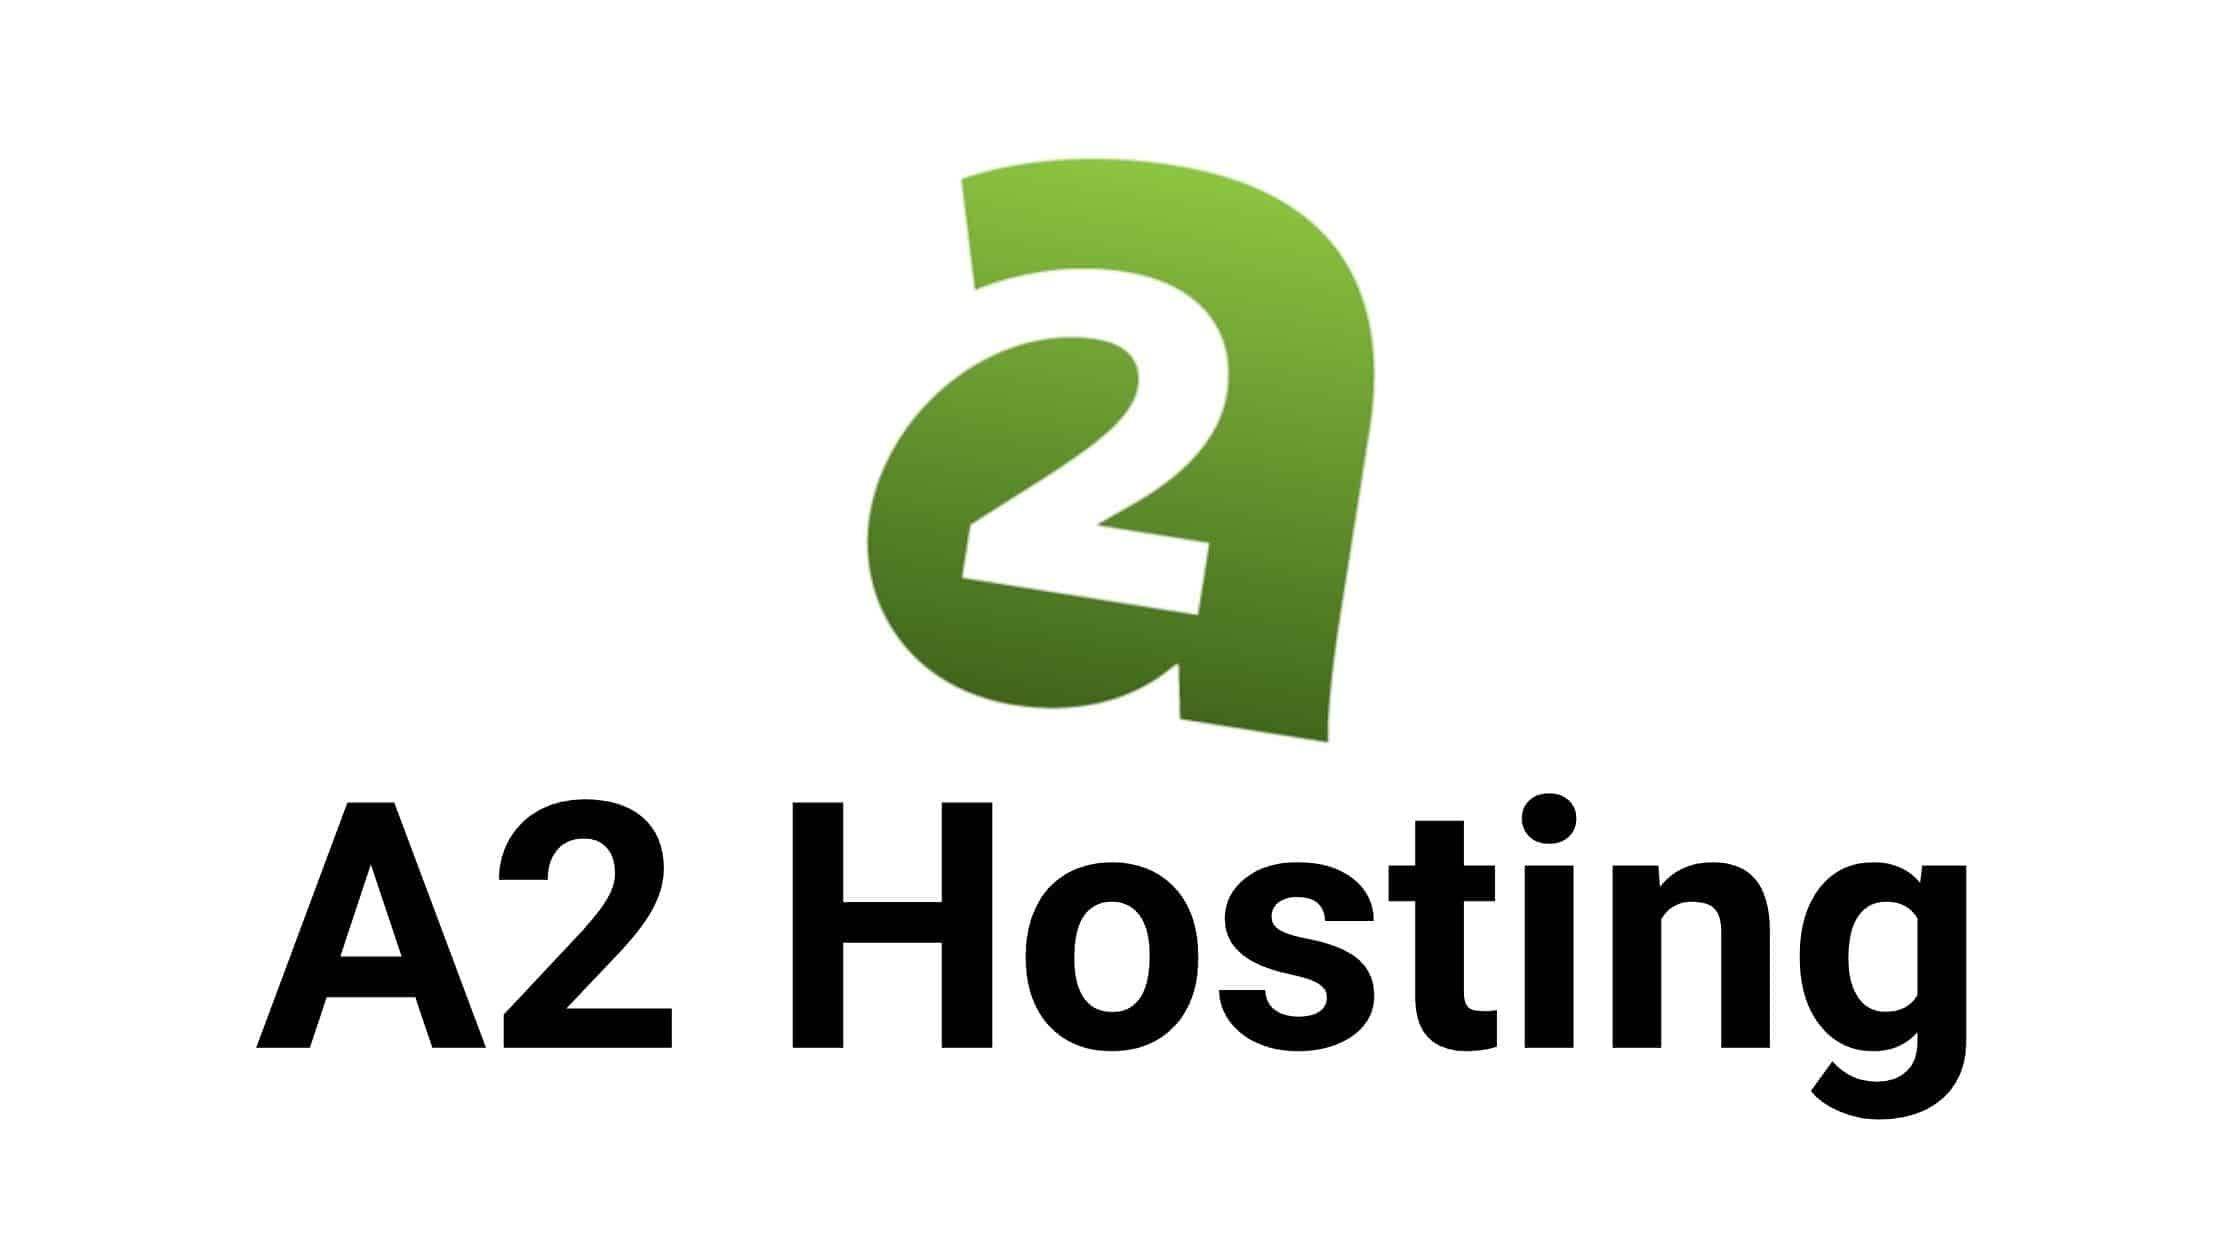 A2 Hosting: Empowering Web Hosting Solutions for Speed, Reliability, and Support